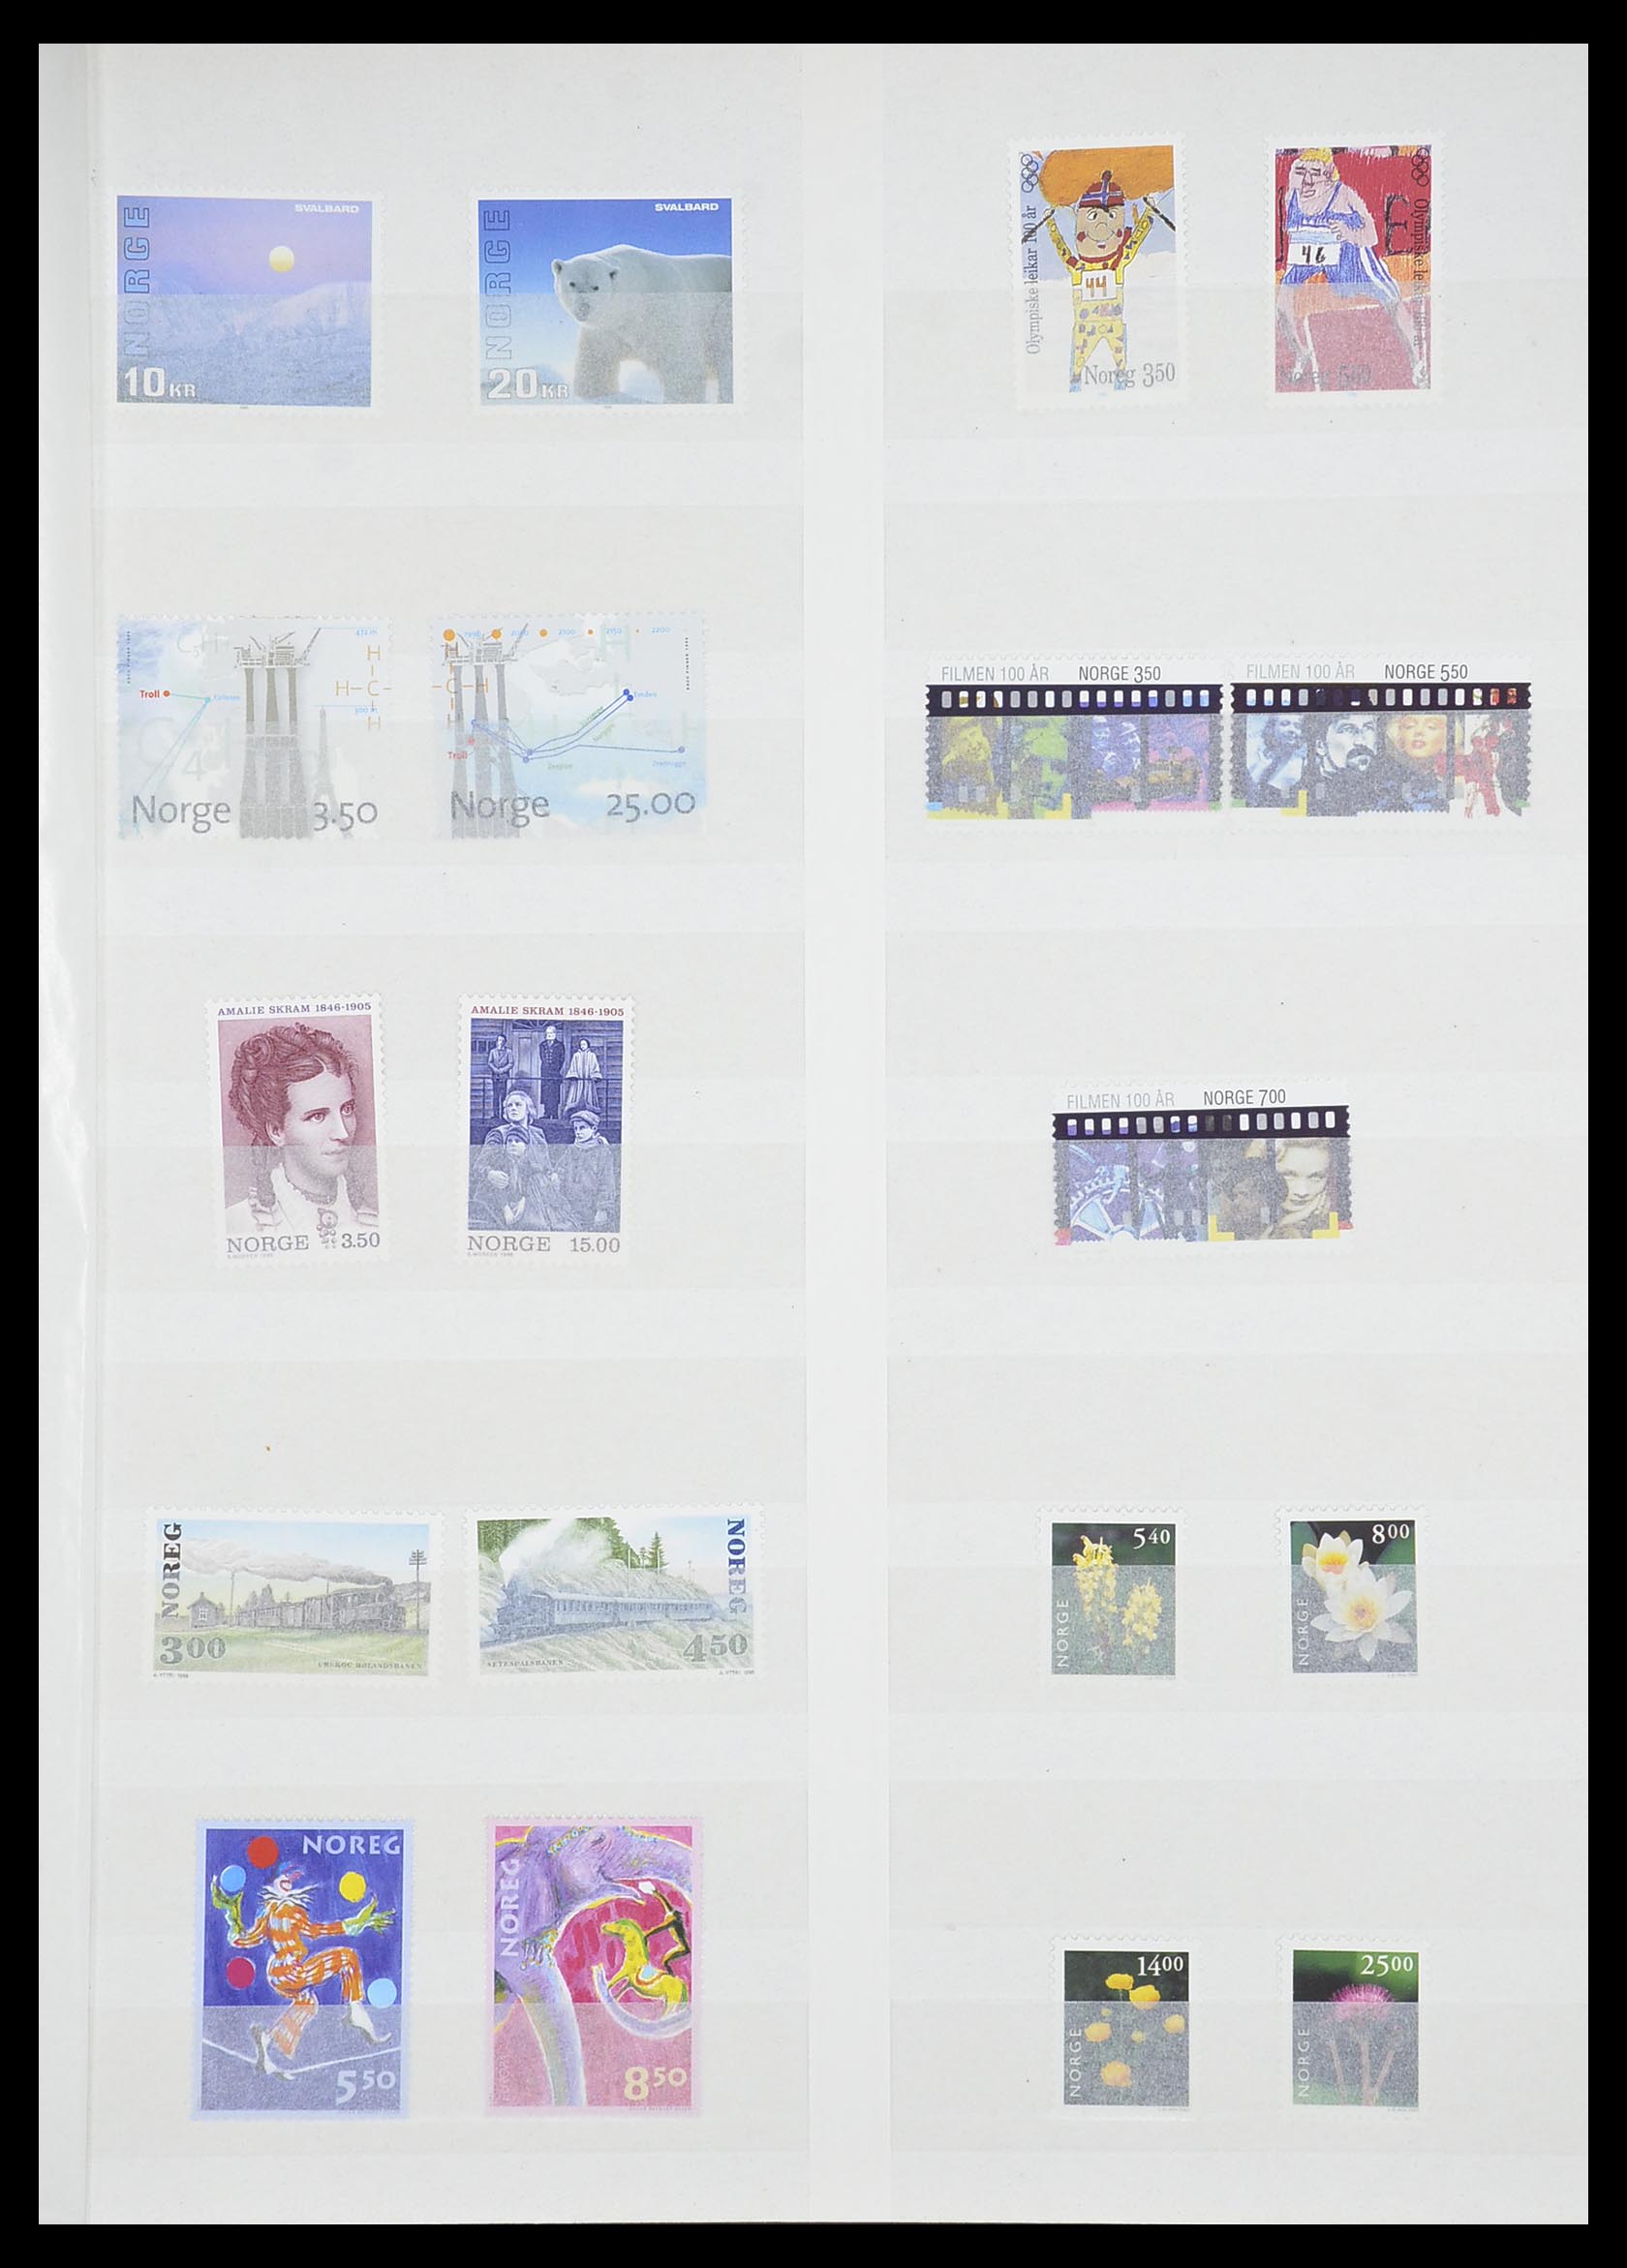 33726 077 - Stamp collection 33726 Scandinavia up to 2006.